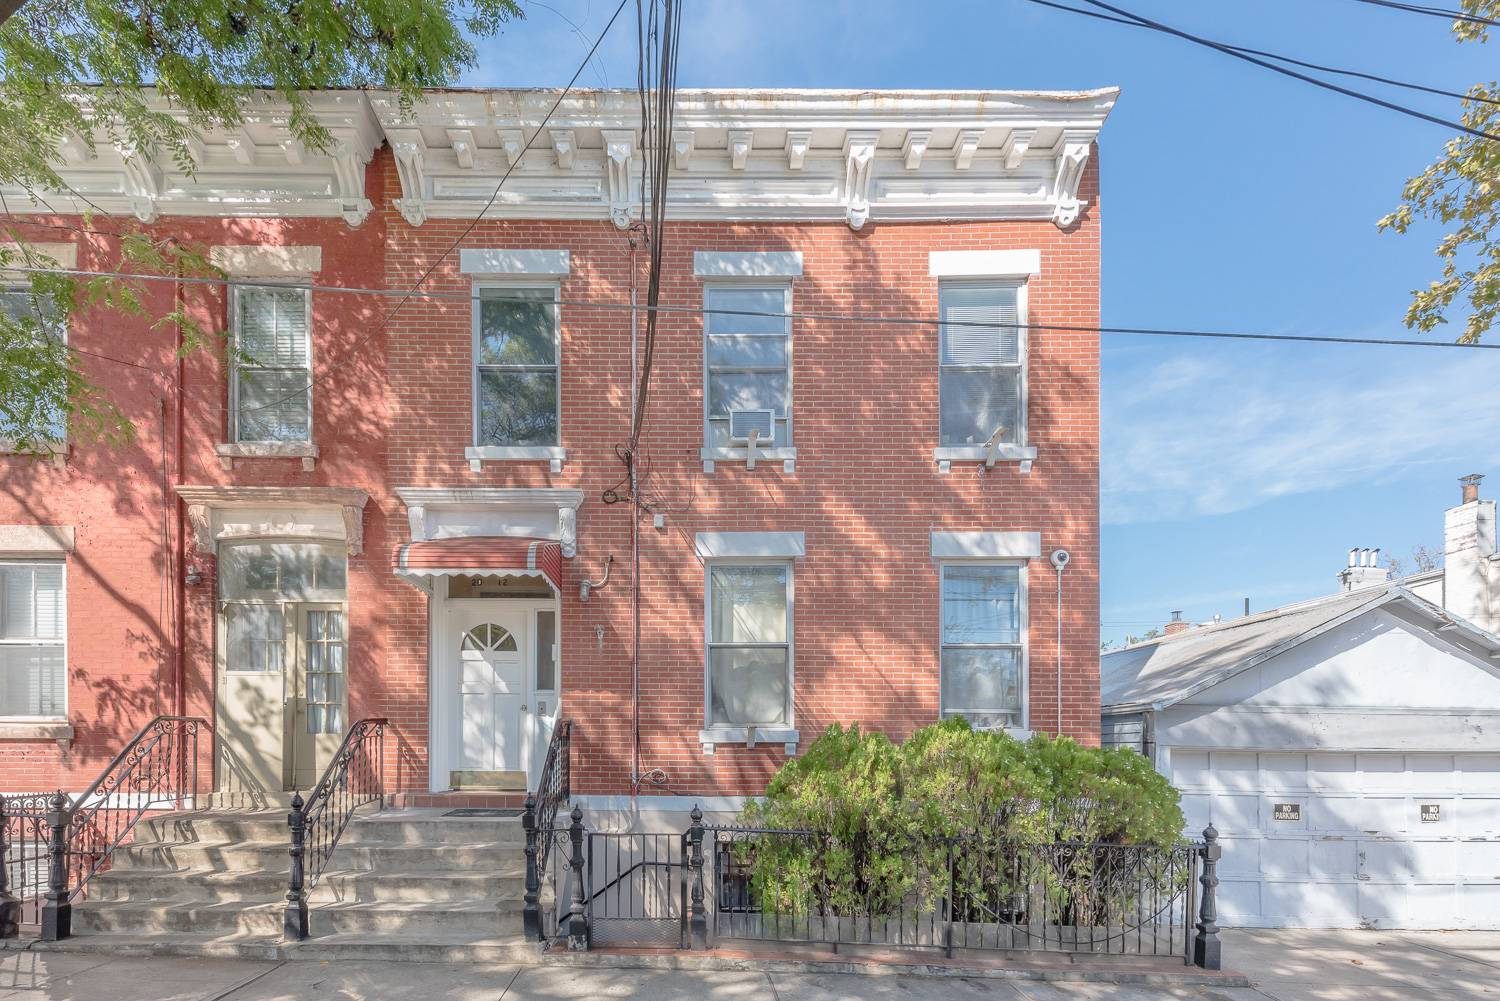 This well maintained and updated semi detached brick legal 3 family home is located in the Upper Ditmars section of Astoria Queens with excellent proximity to local highlights such as ...